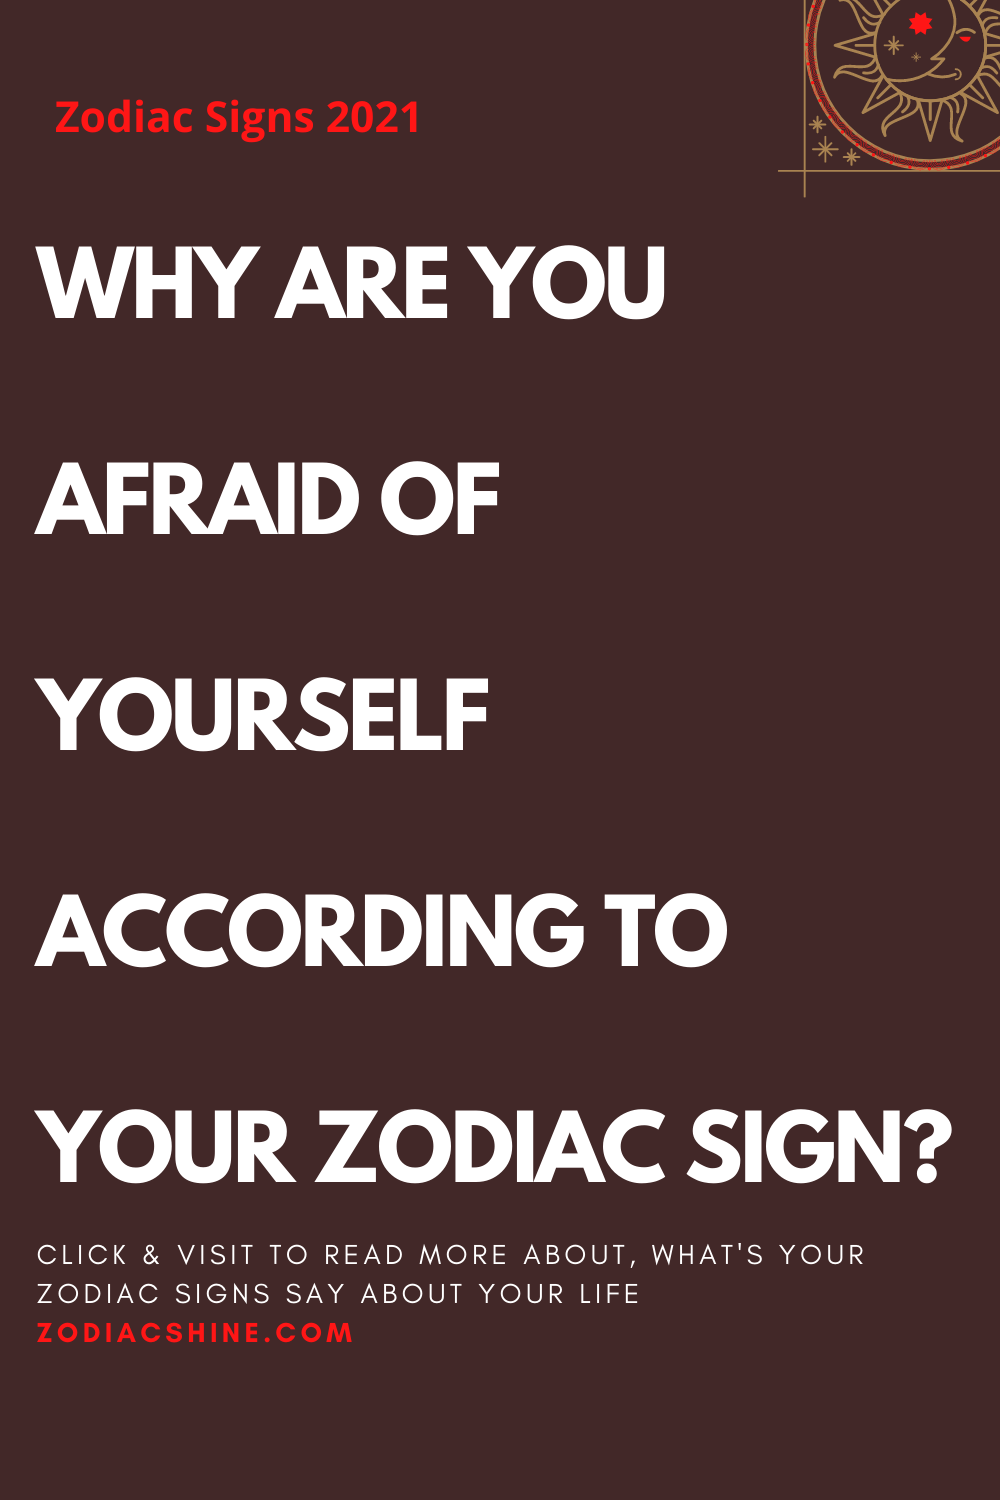 WHY ARE YOU AFRAID OF YOURSELF ACCORDING TO YOUR ZODIAC SIGN?